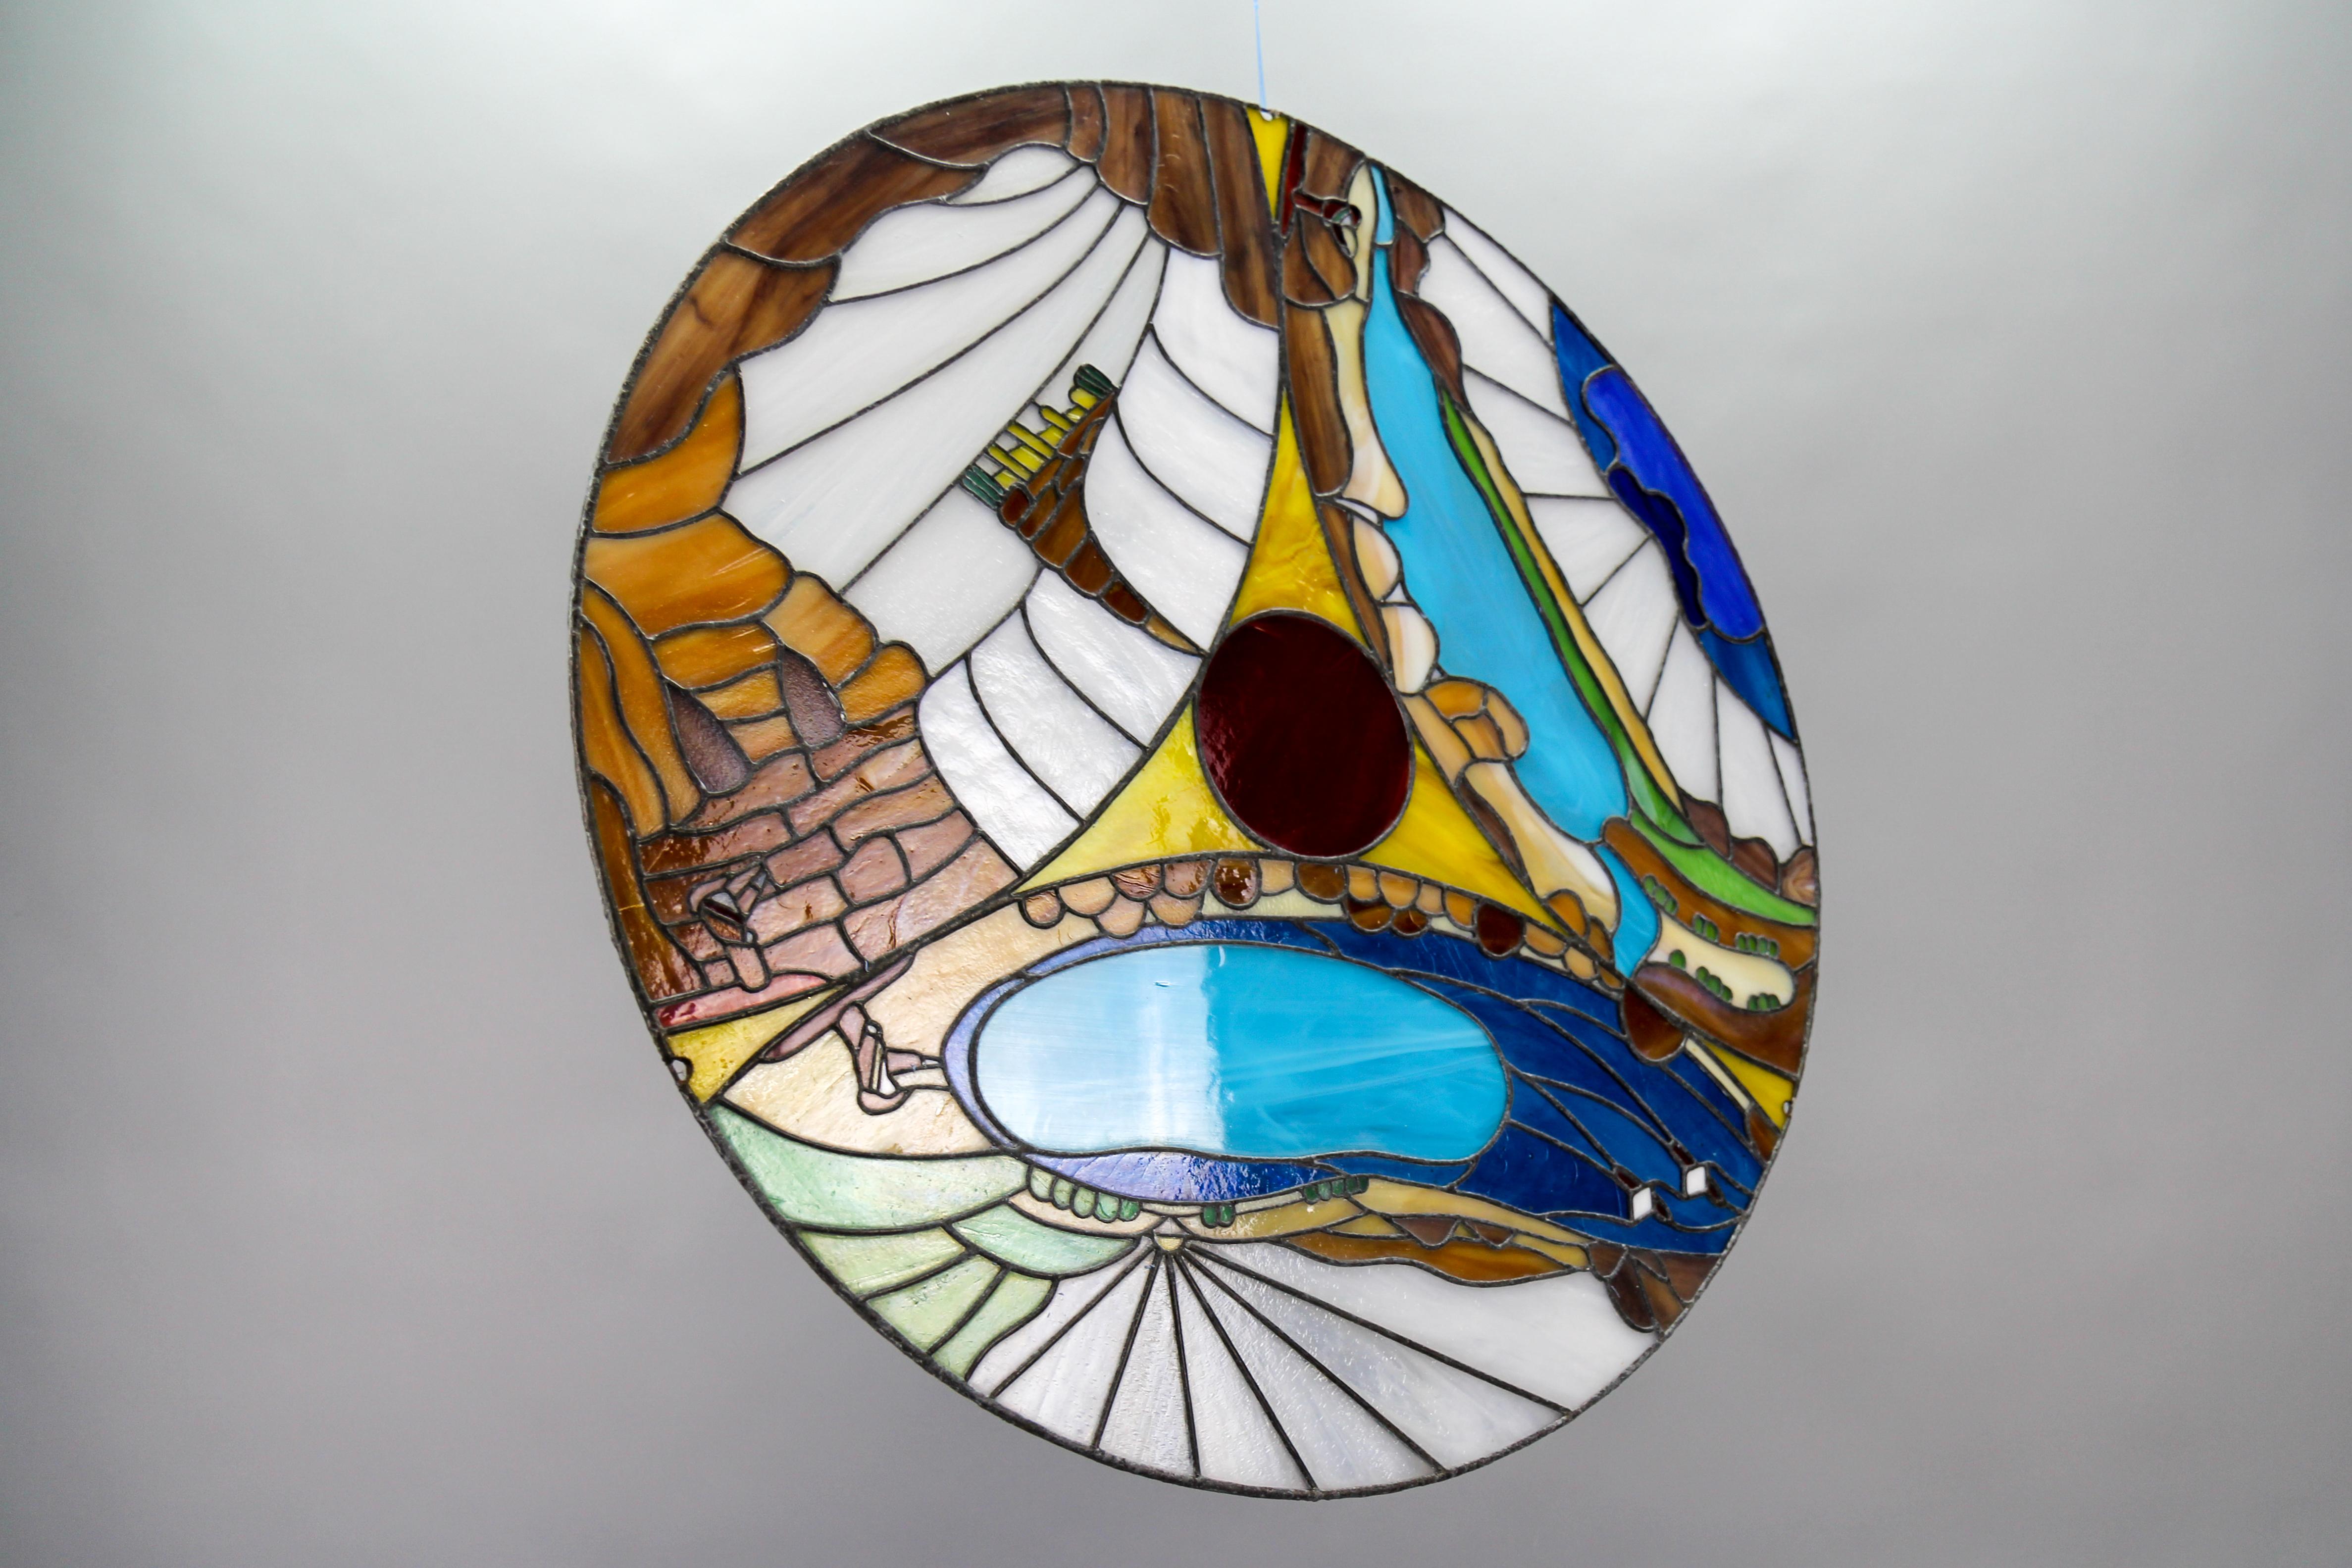 Round Polychrome Tiffany-Style Stained Glass Window Panel, 1970s For Sale 2